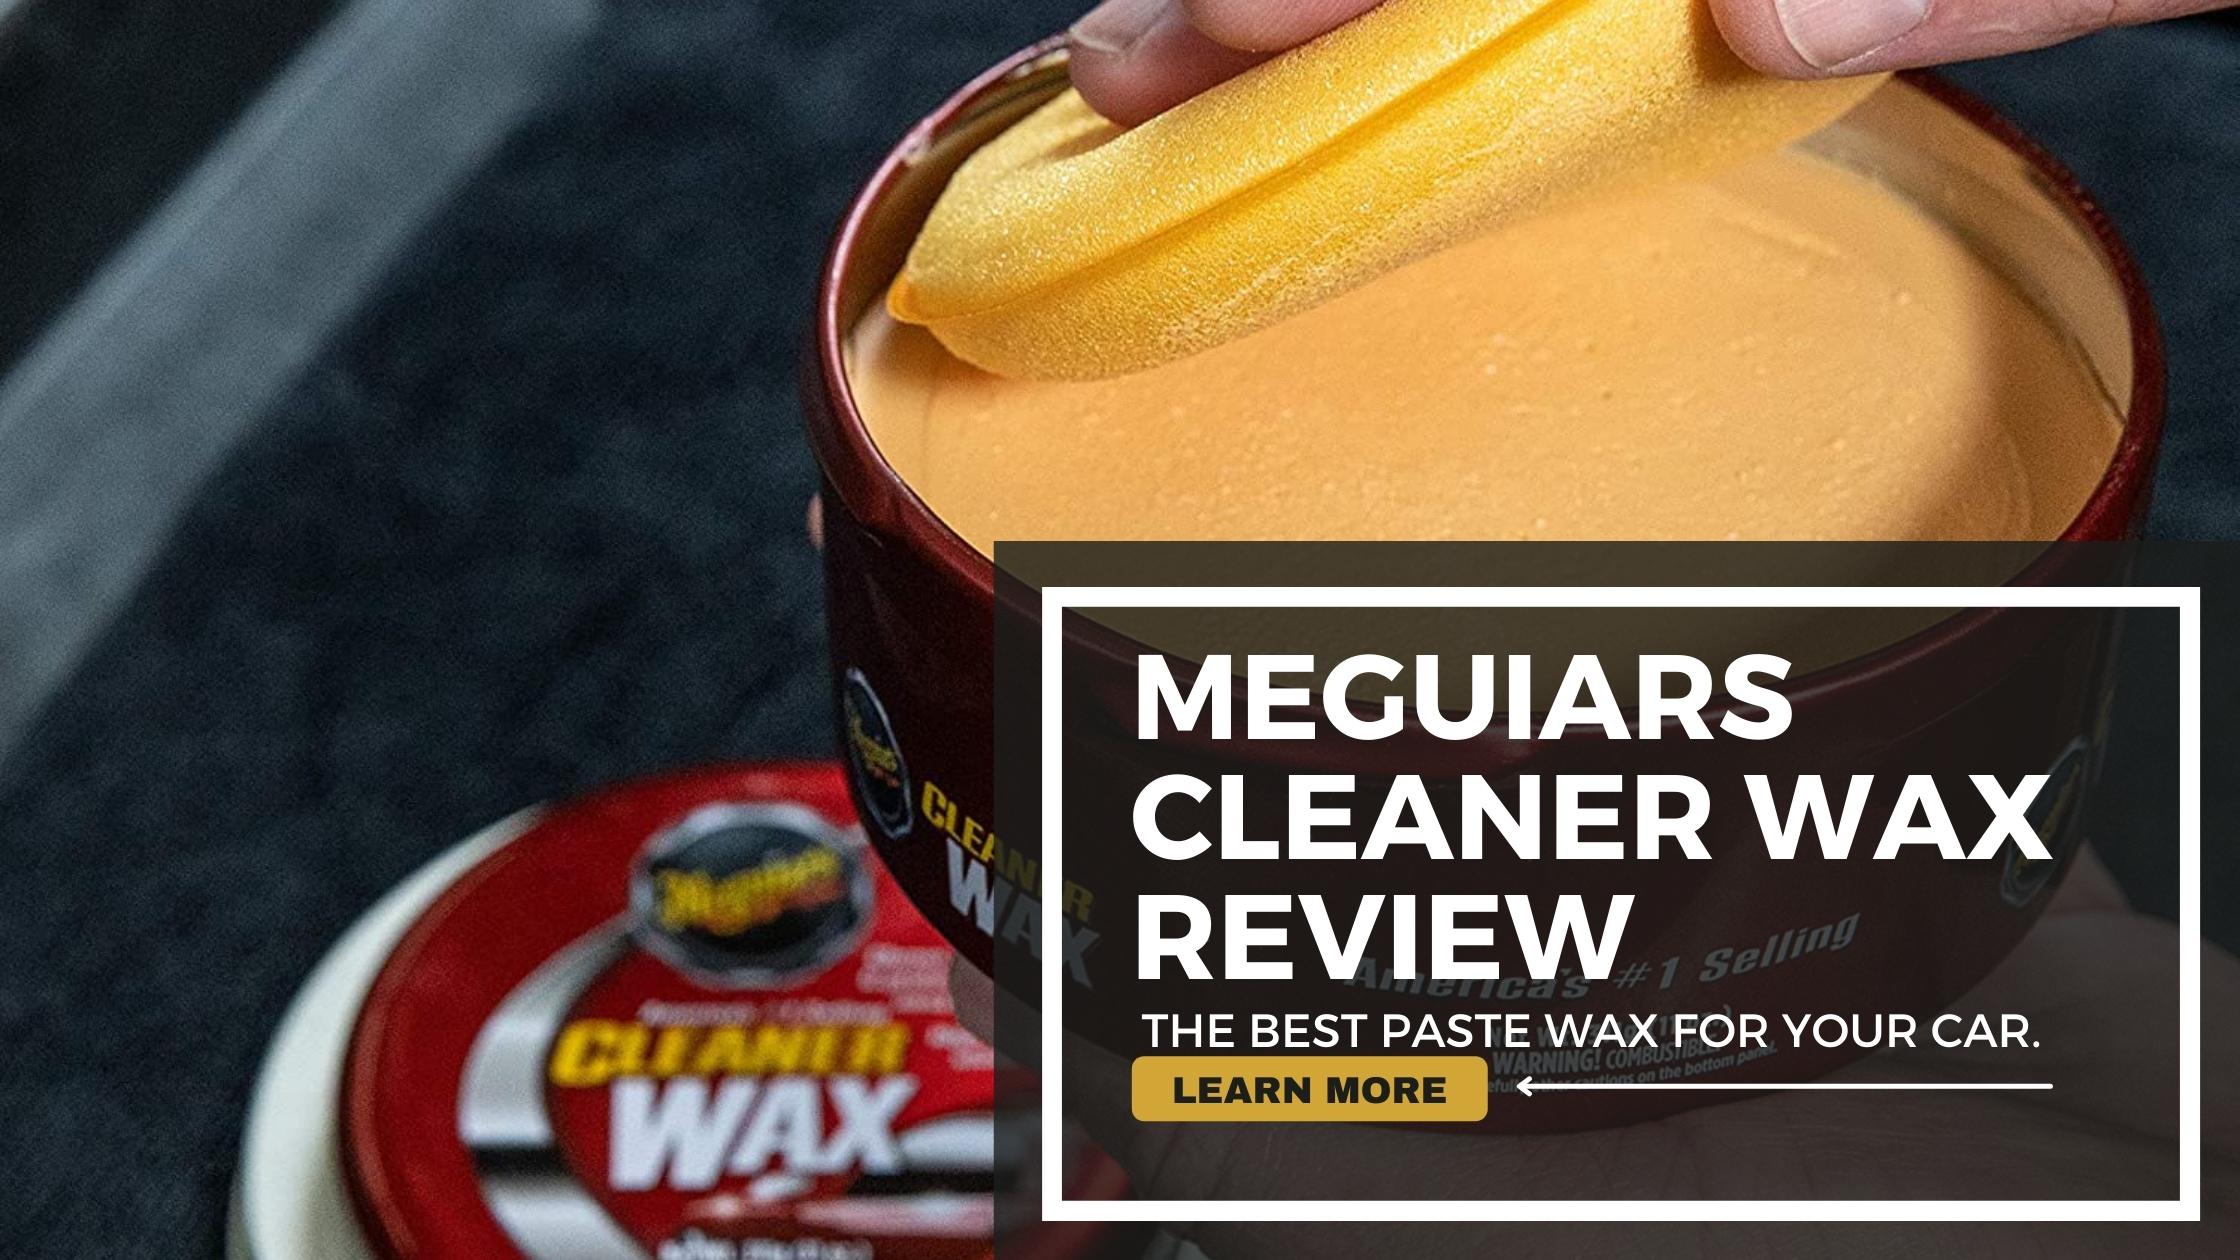 Meguiars Cleaner Wax Review